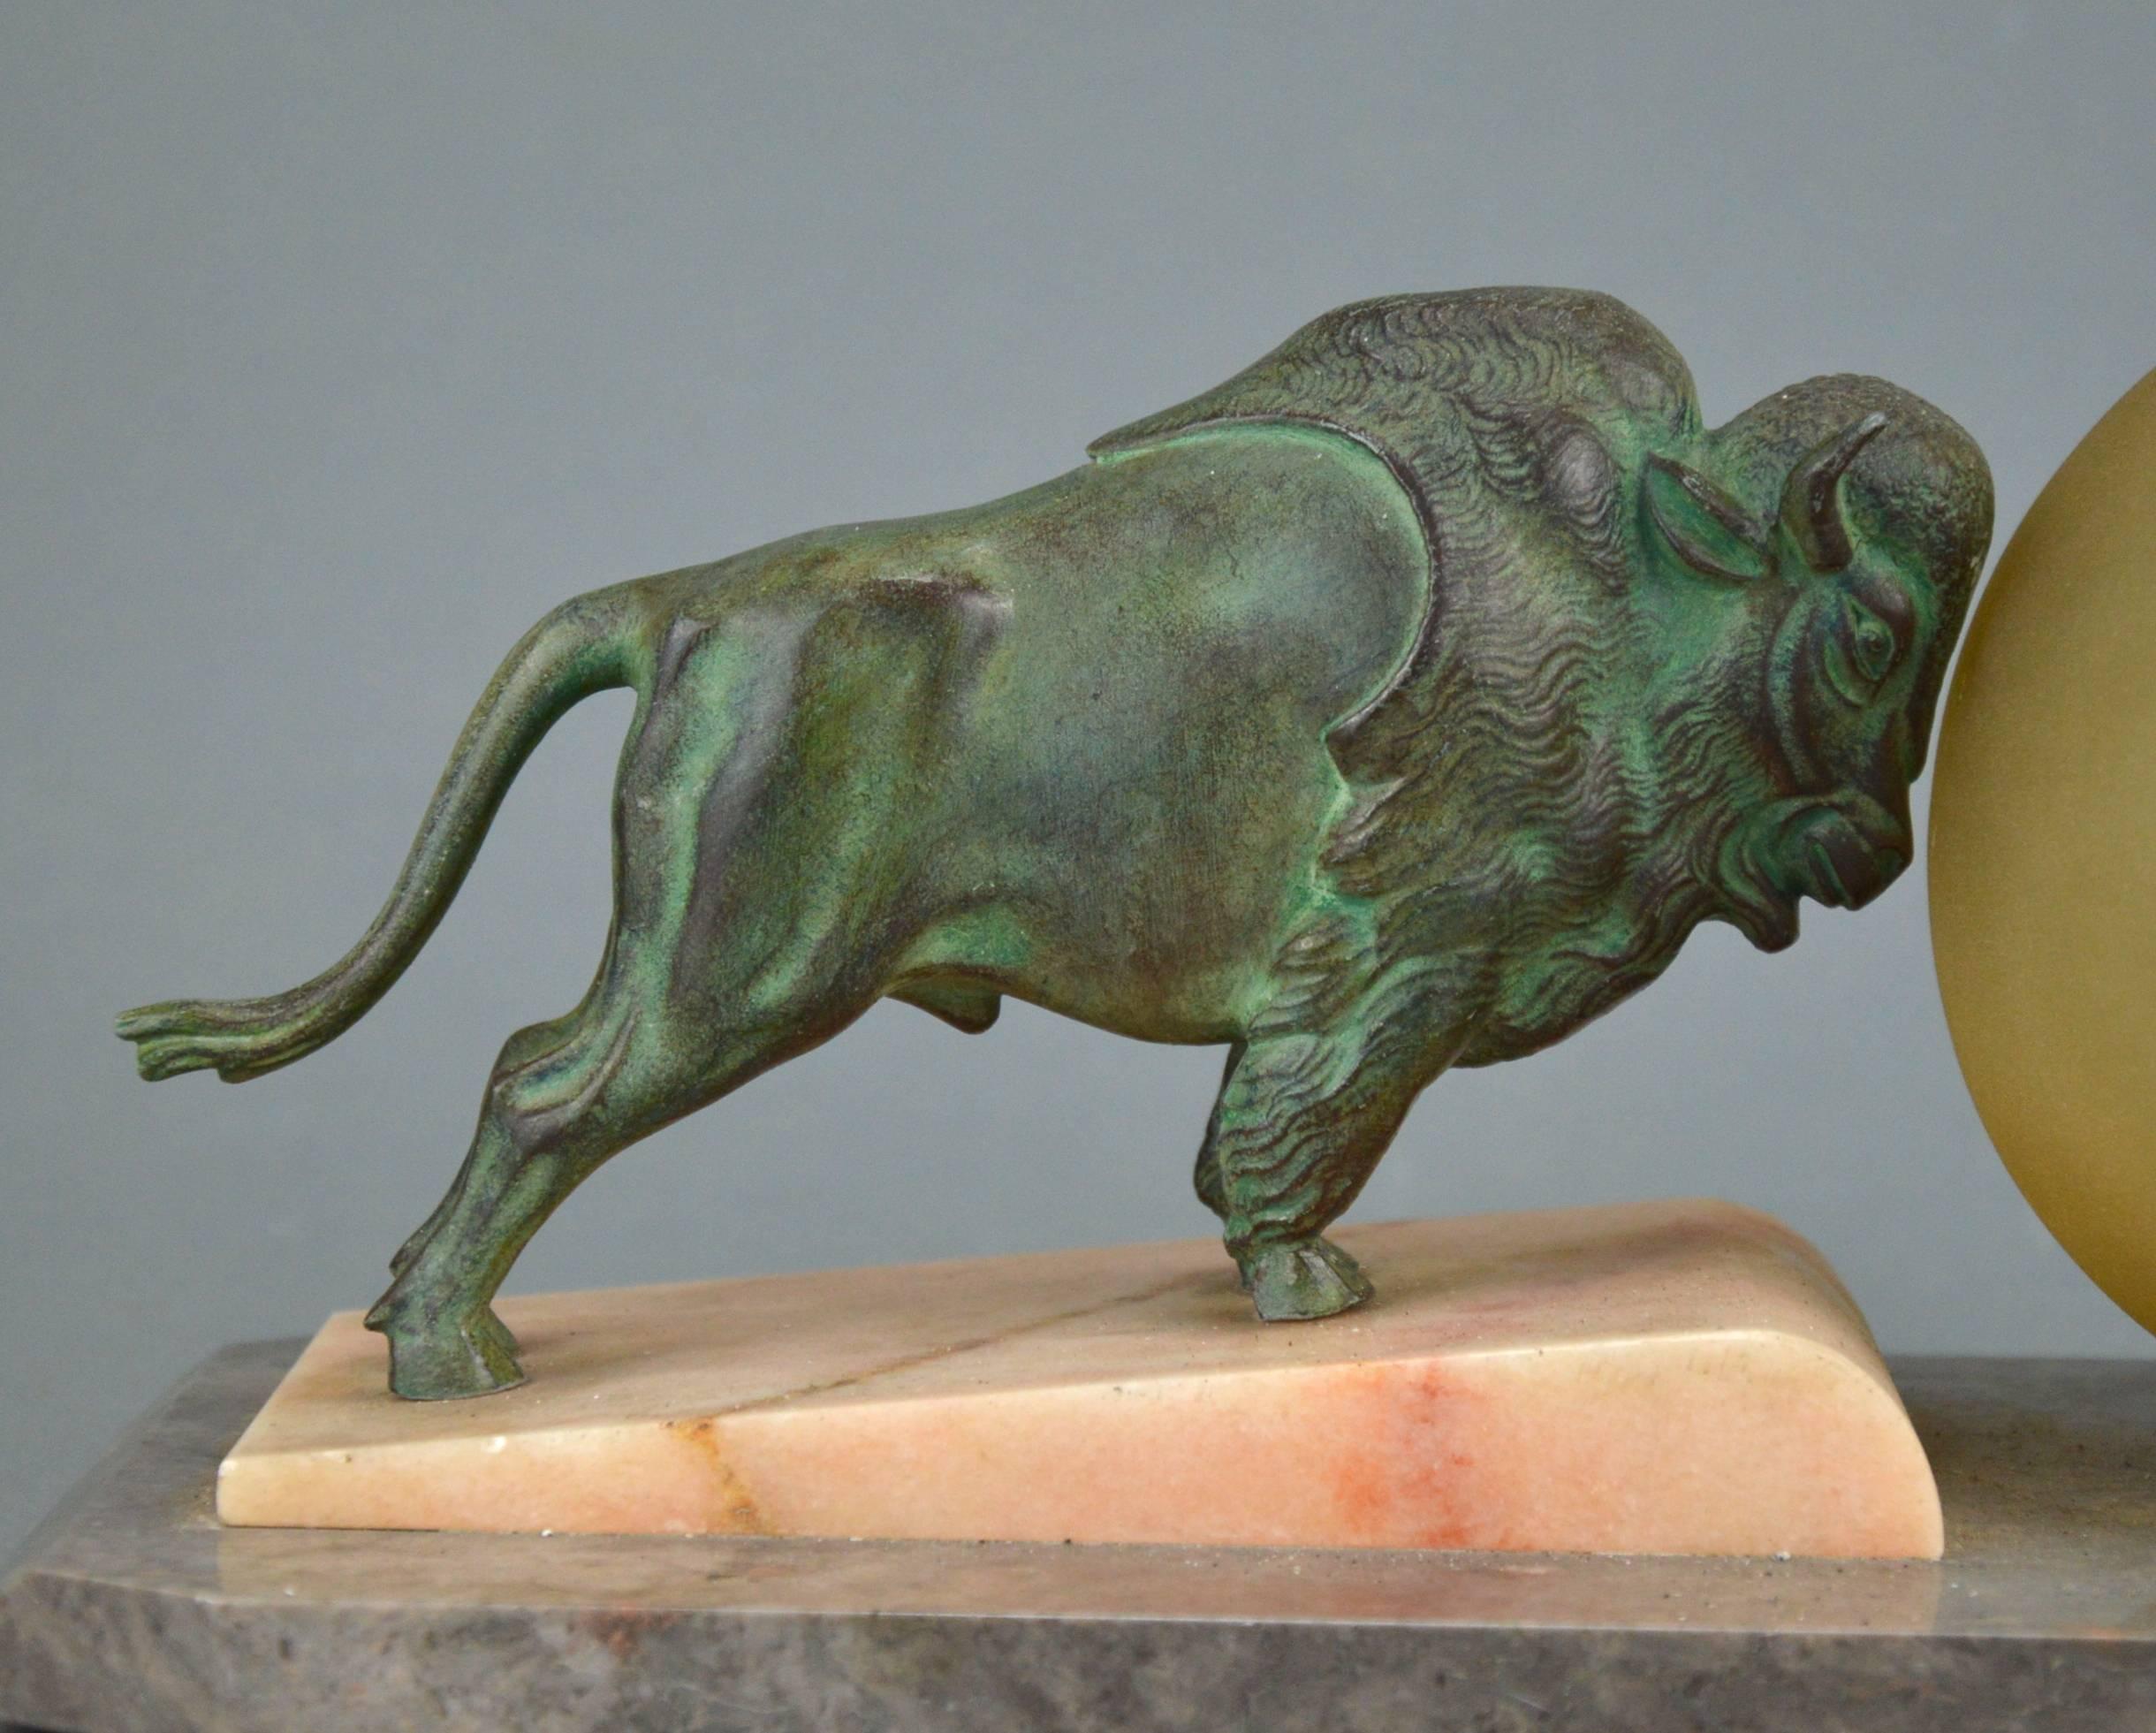 Beautiful original Art Deco table lamp representing a Bison pushing a ball, France, 1920-1930s.
Bison sculpture - patinated metal, base - white marble and grey stone, glass shade.
Dimensions: height - 5 in. (13 cm), base – 10 x 8 x 9 in. (12 x 5.5